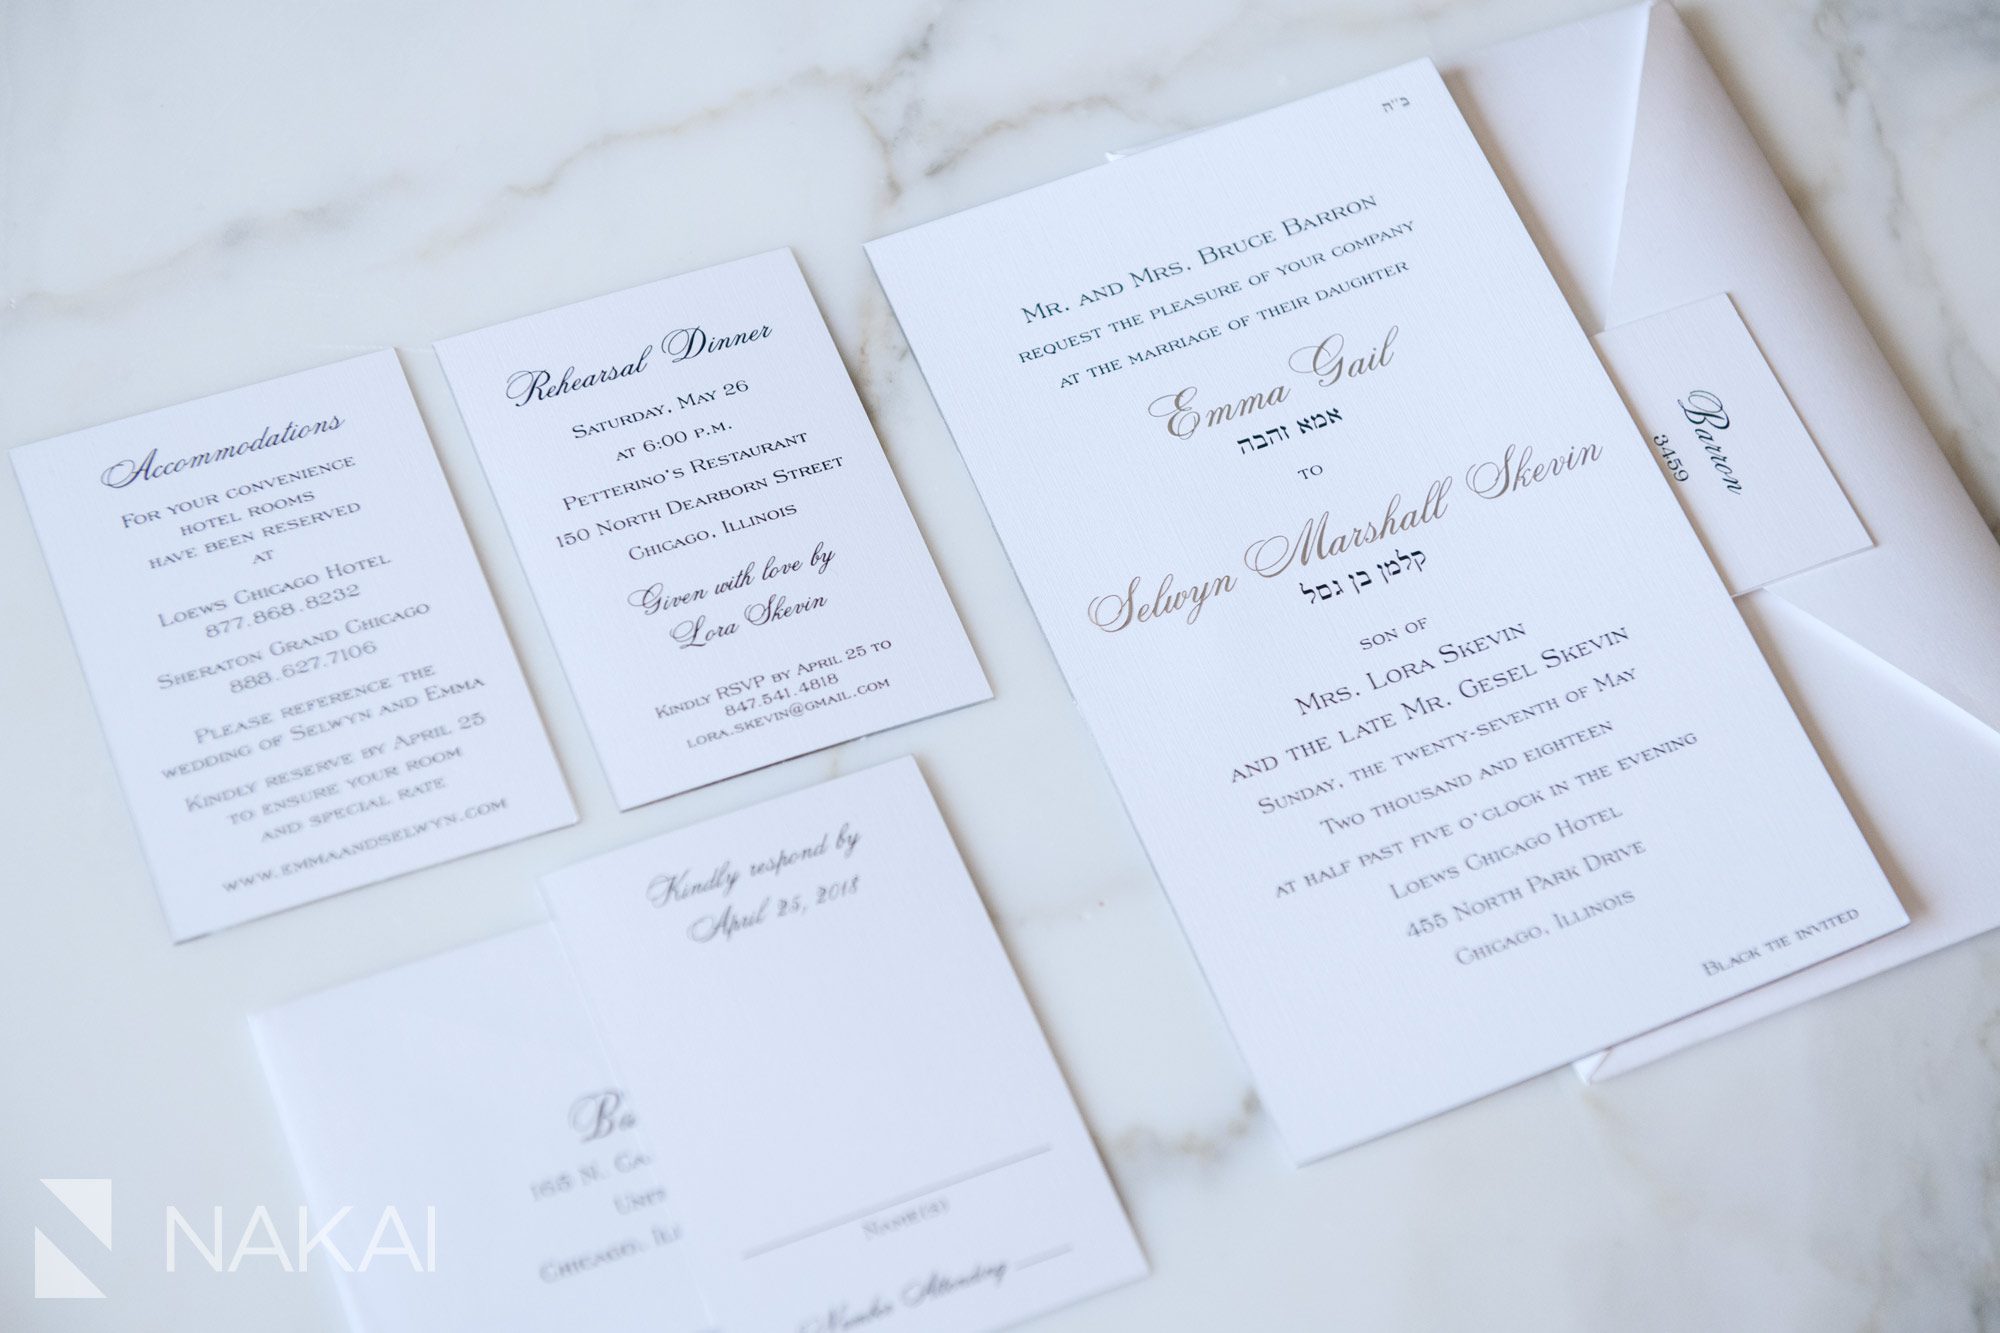 Loews Chicago wedding pictures downtown details invitations